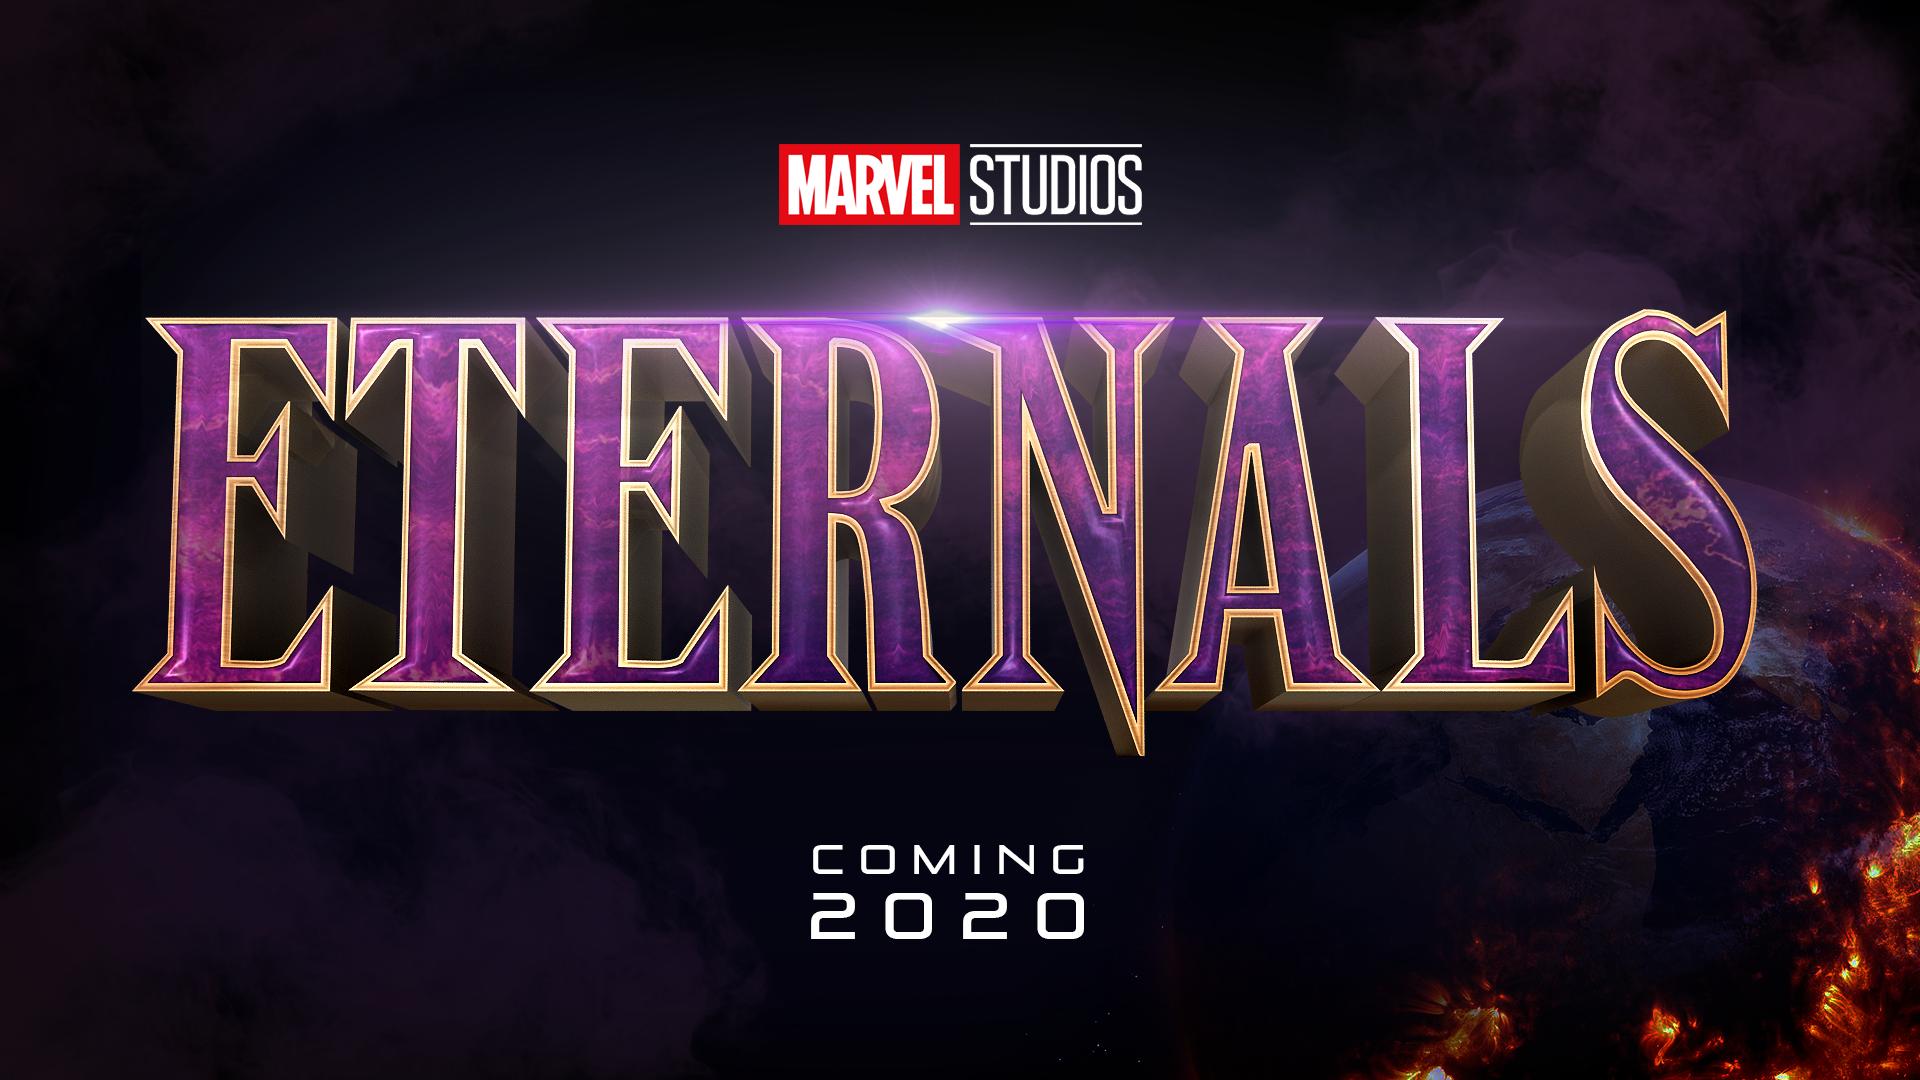 Free download The Eternals update MCU Phase 4 new entry cast and plot Hiptoro [1920x1080] for your Desktop, Mobile & Tablet. Explore The Eternals Movie 2020 Wallpaper